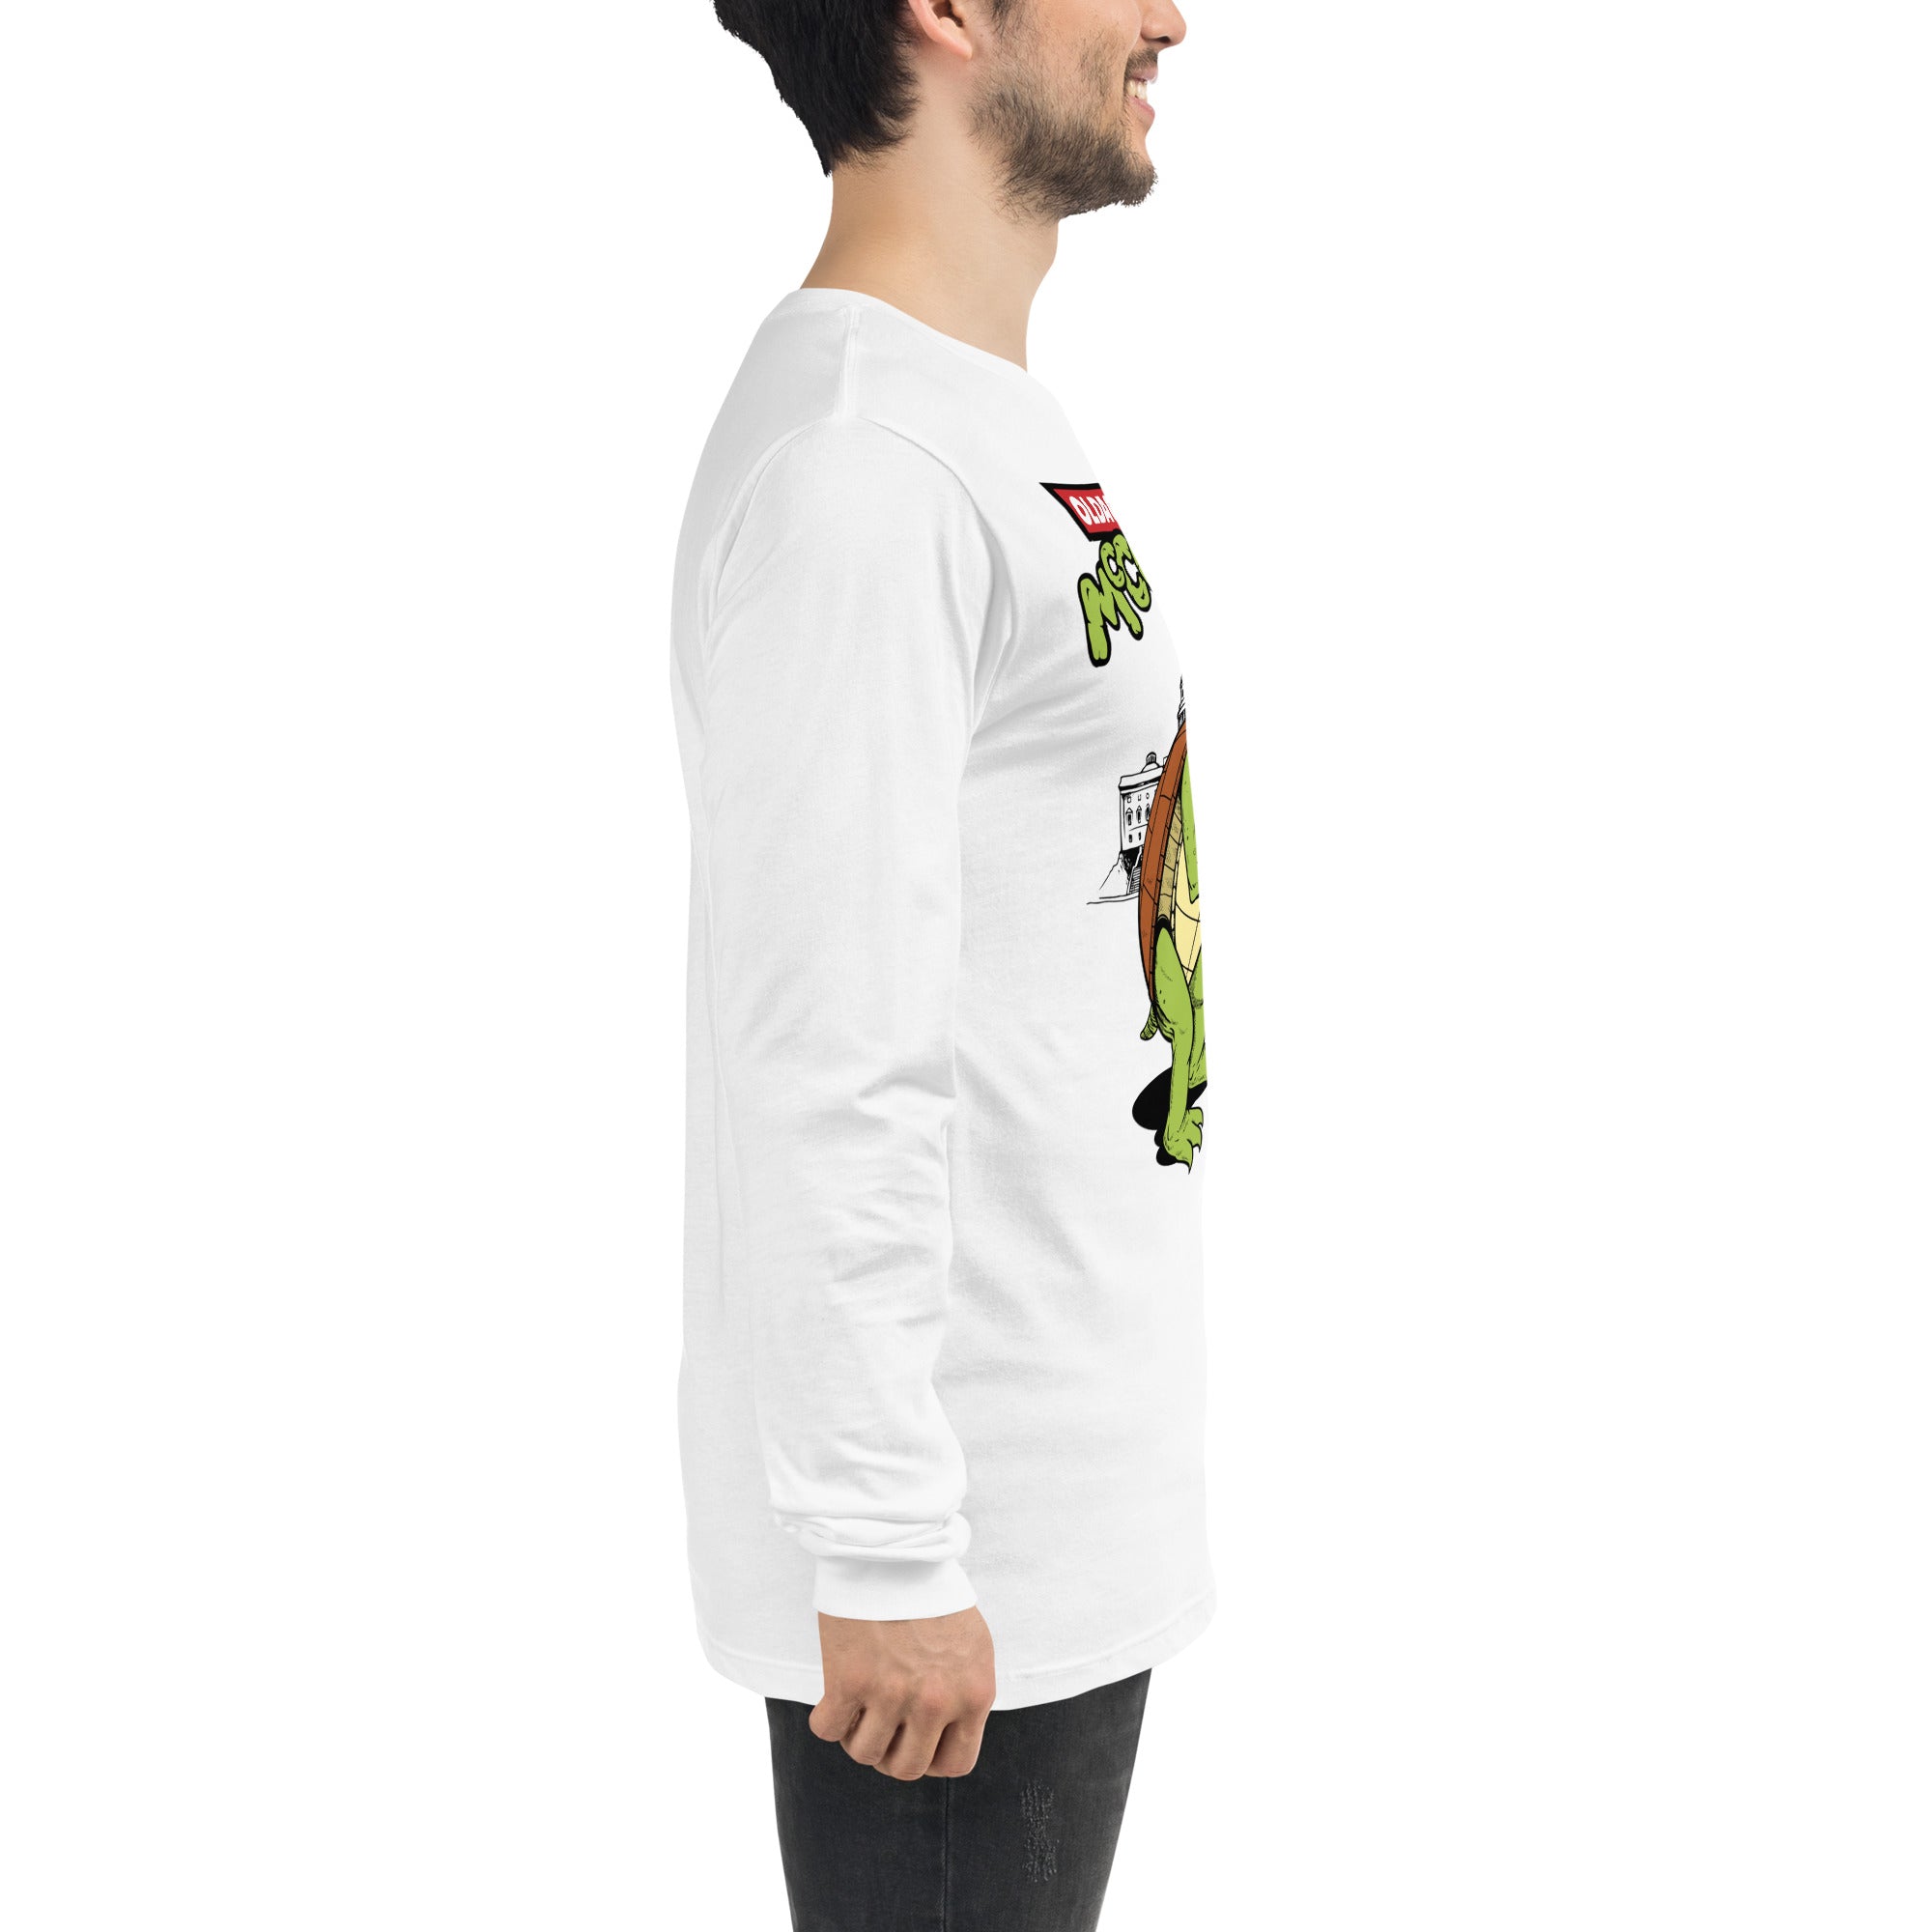 Old Age Mutant Mitch McConnell Long Sleeve Tee